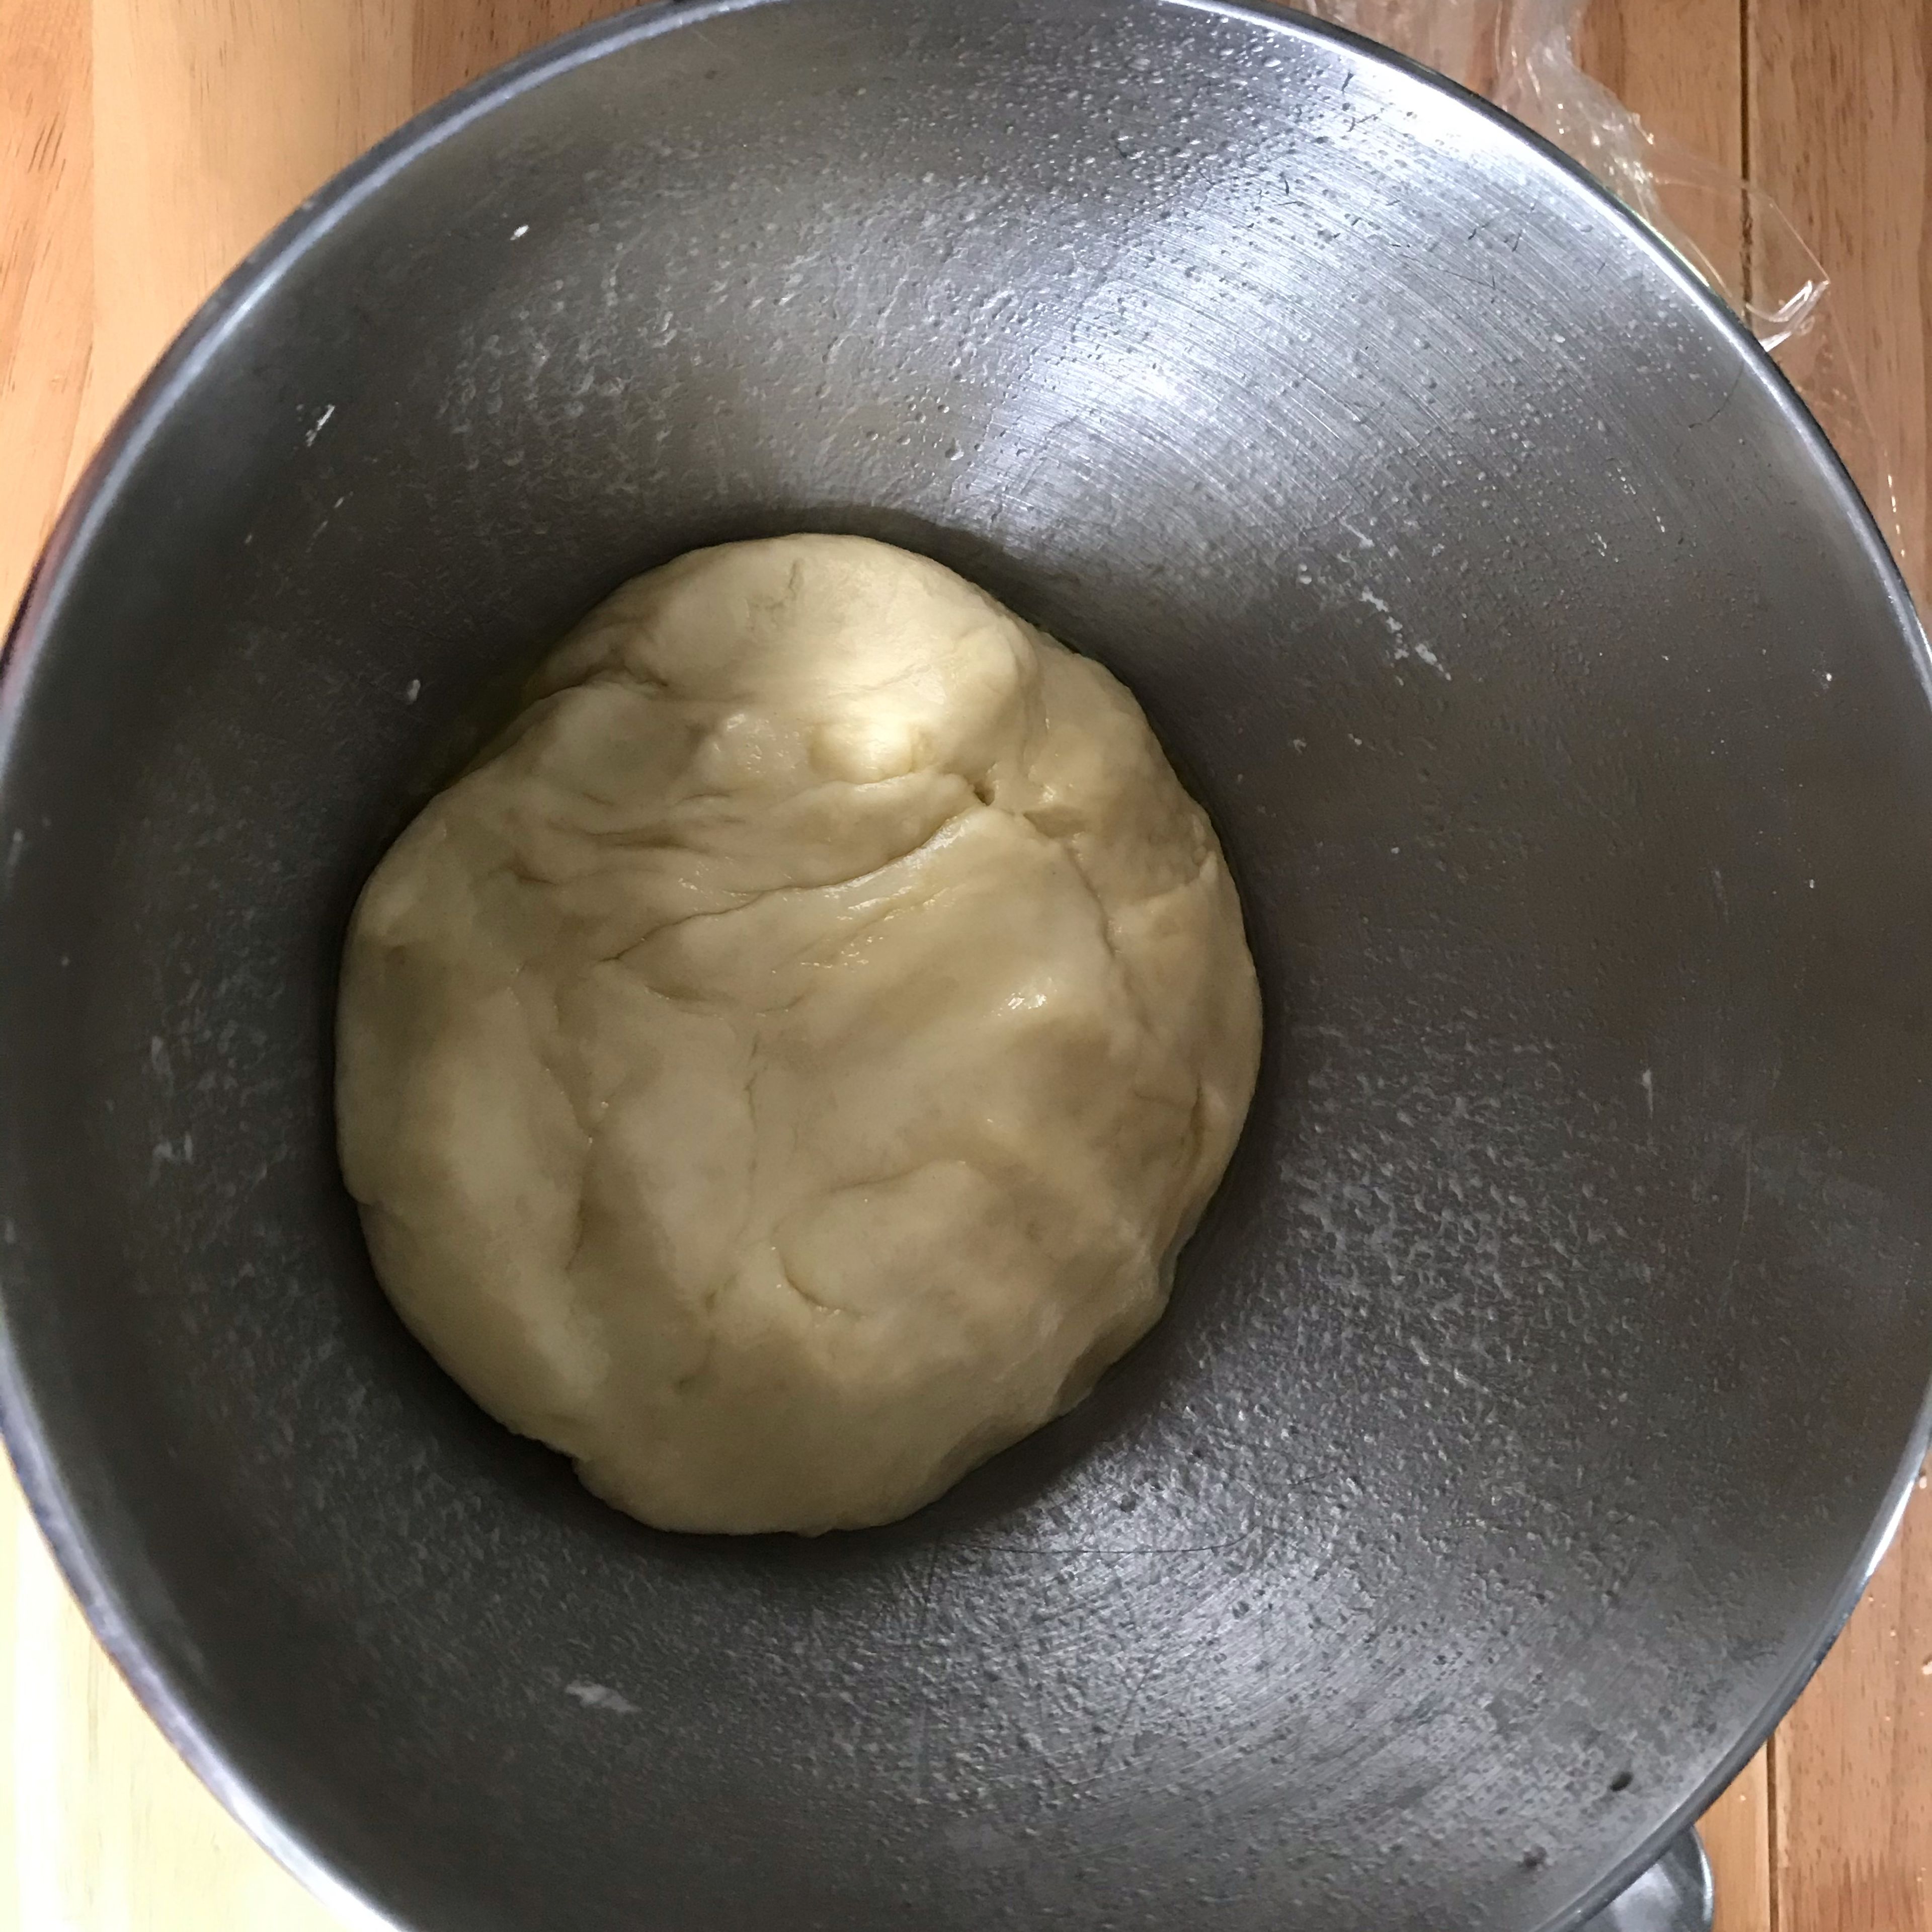 Take your dough out of the bowl it should be much bigger and thicker oil a sheet pan and place your dough down and roll it out. place whatever toppings you desire in top.